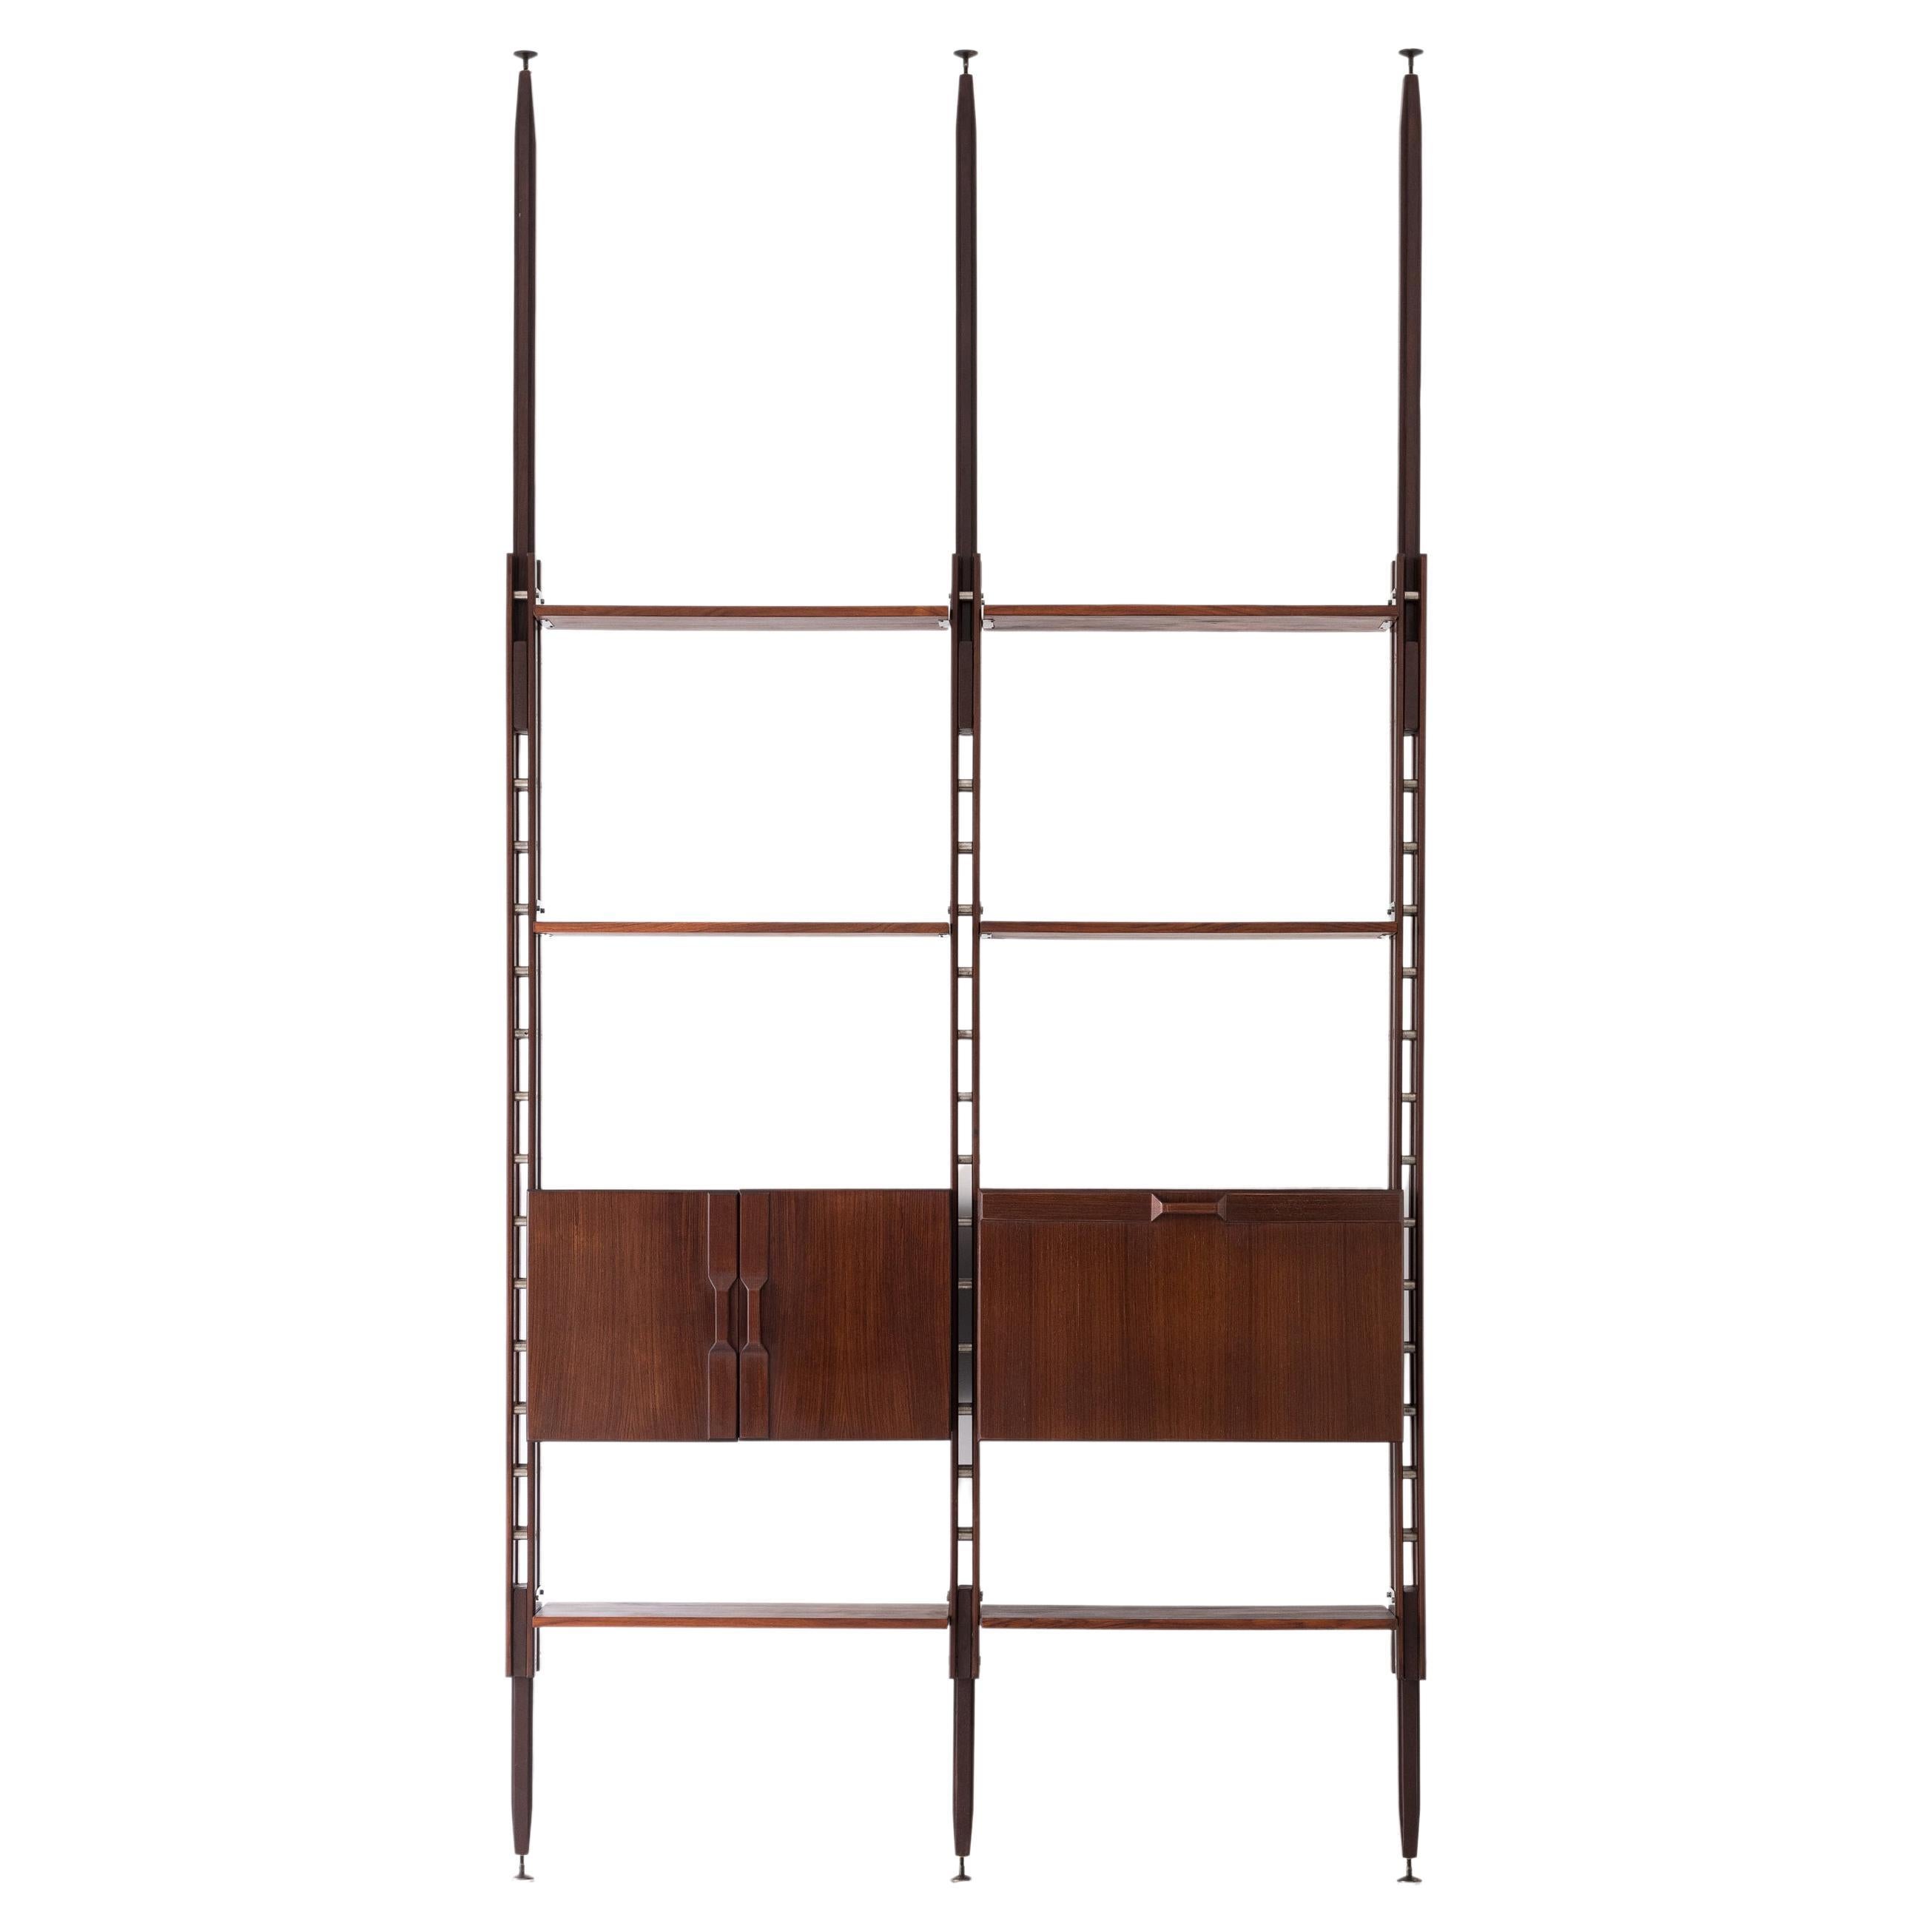 Italian bookshelf, floor to ceiling fixing system, exotic wood, 1950s.

This rare Italian wall unit came from 1950s, its modern design is full of technical details and workmanship typical of high-level Italian manufacturing of the mid-century. 

Can